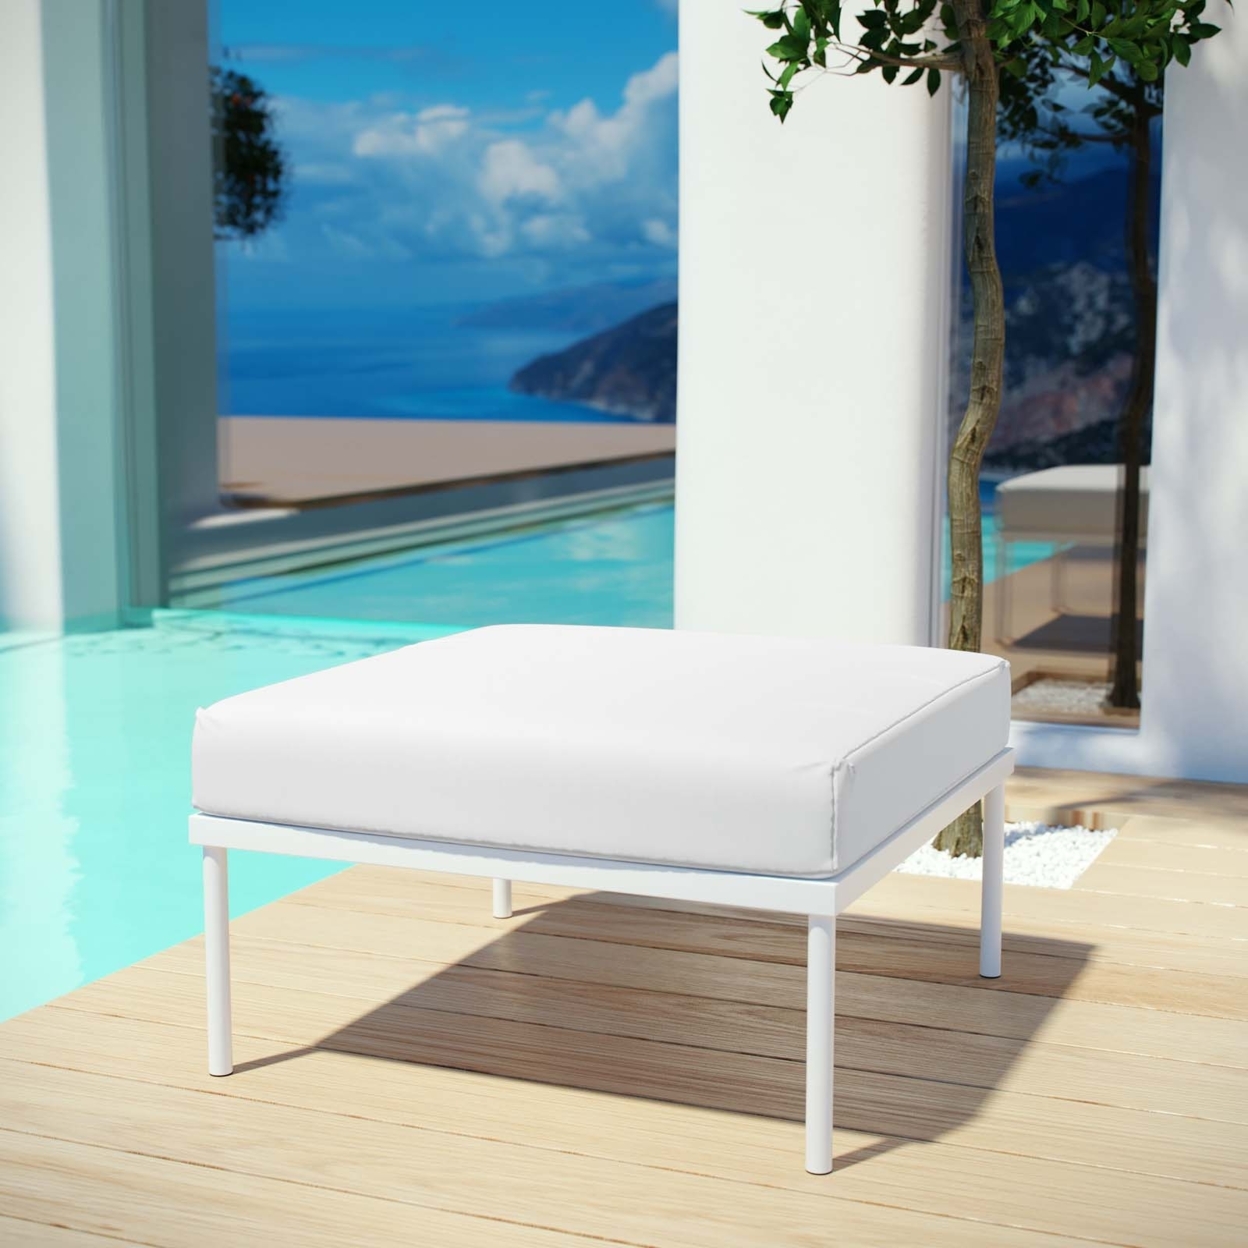 Modway Harmony Outdoor Patio Aluminum Fabric Ottoman in White/White - image 4 of 4